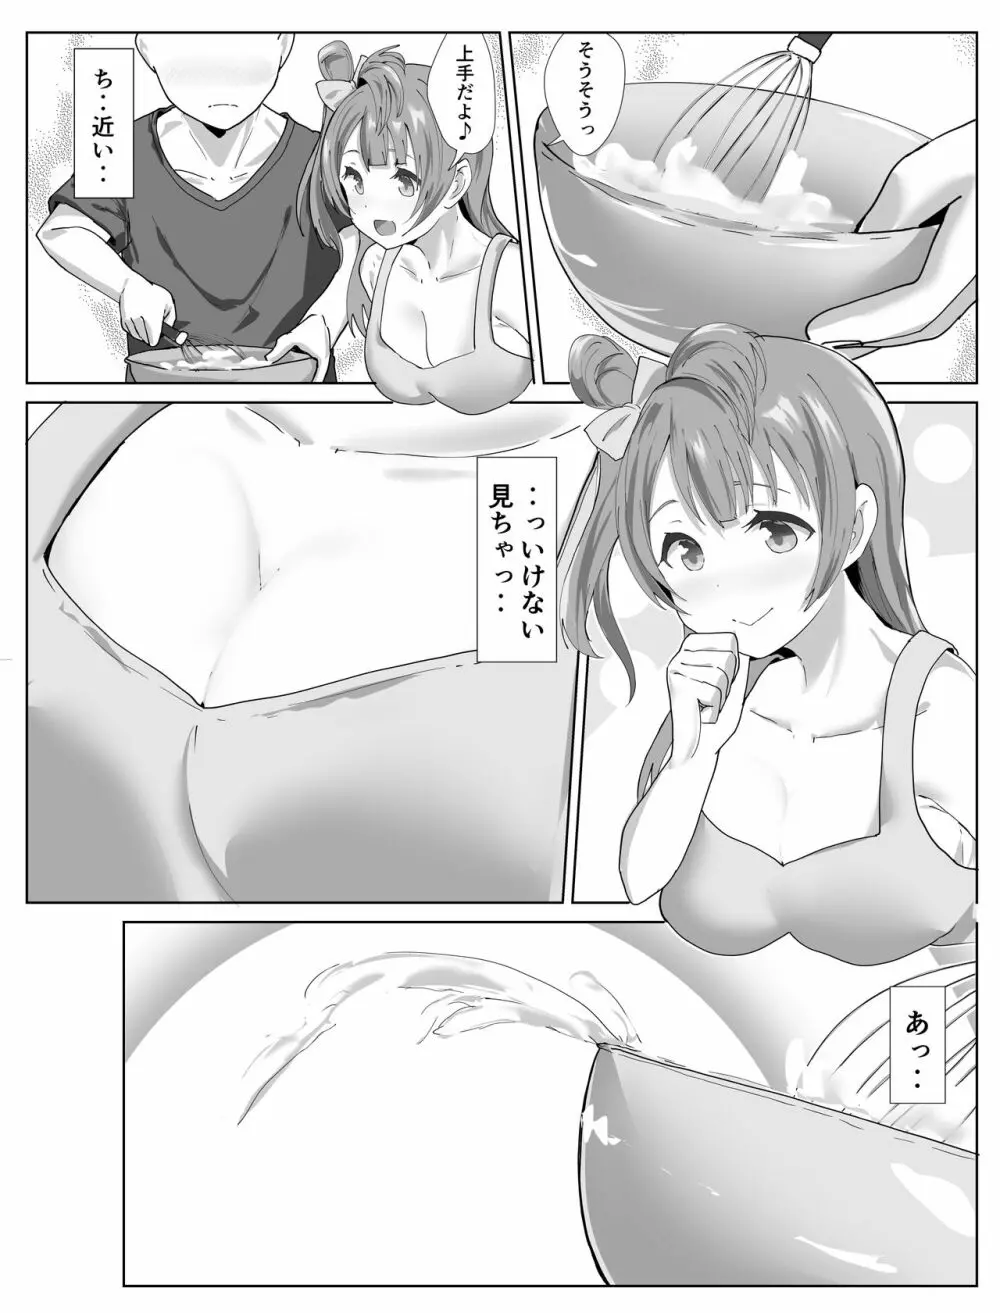 e-rn fanbox short love live doujinshi collection - page42